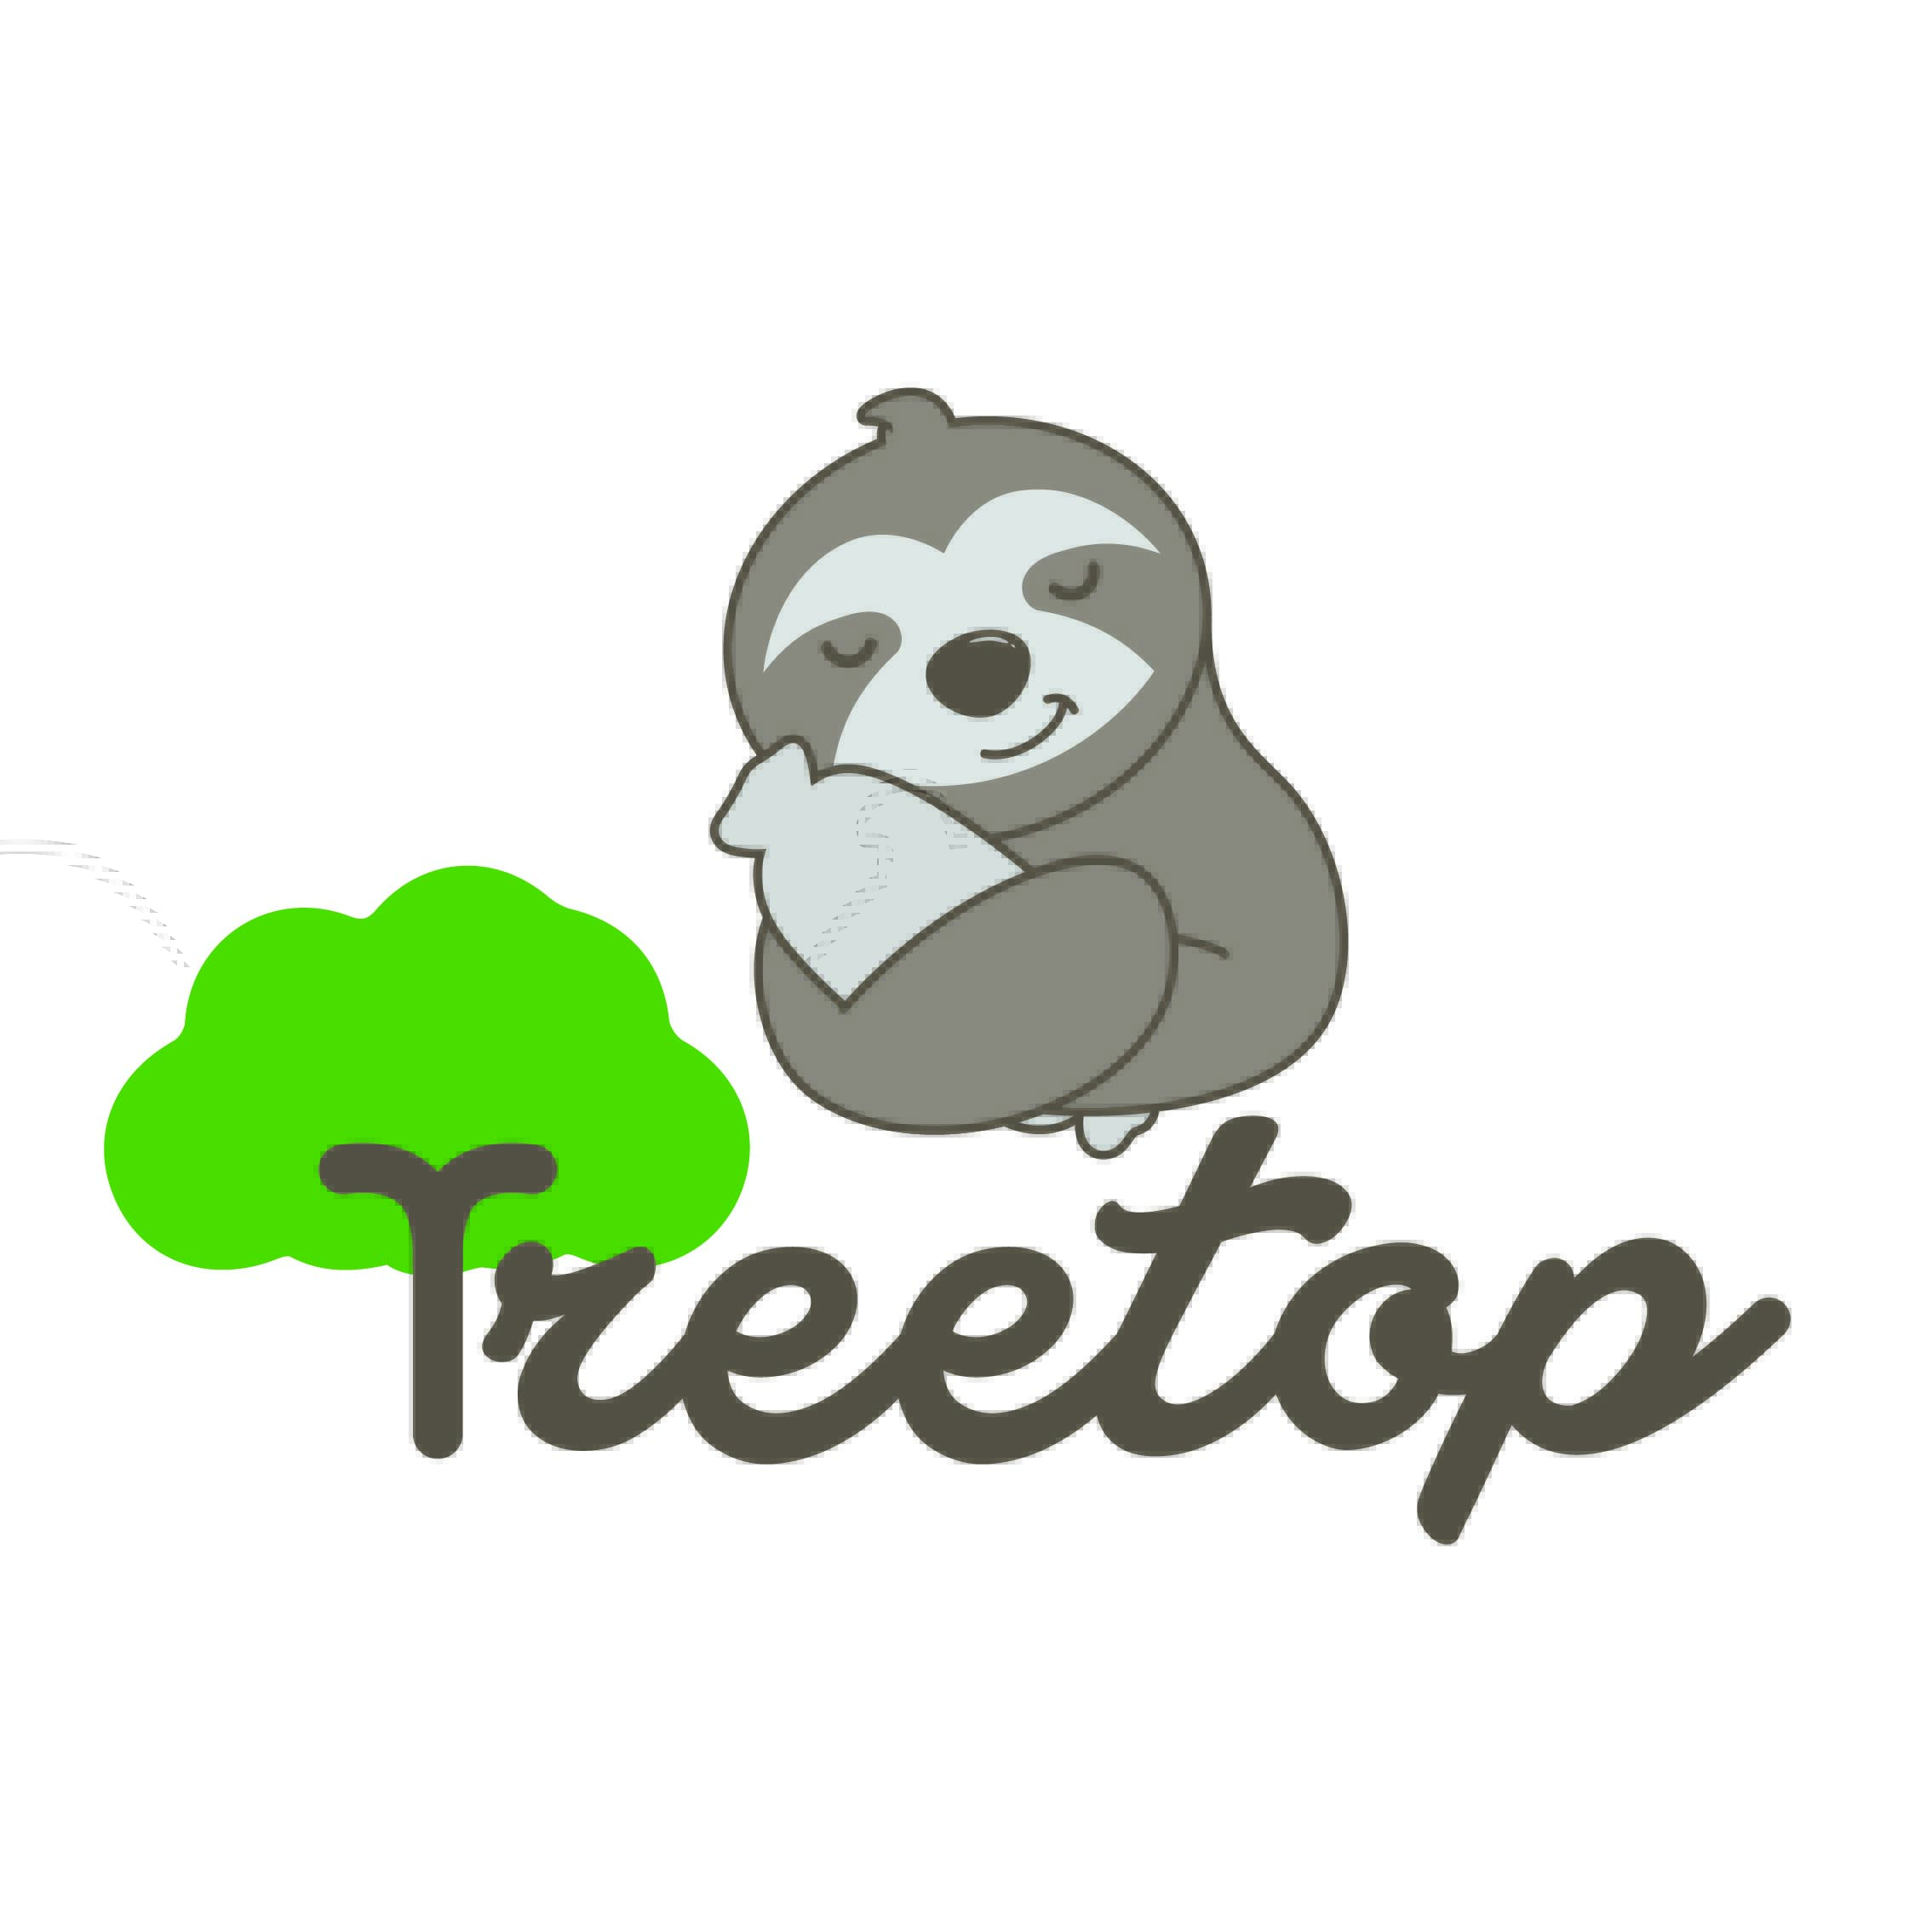 shoptreetop Official Store